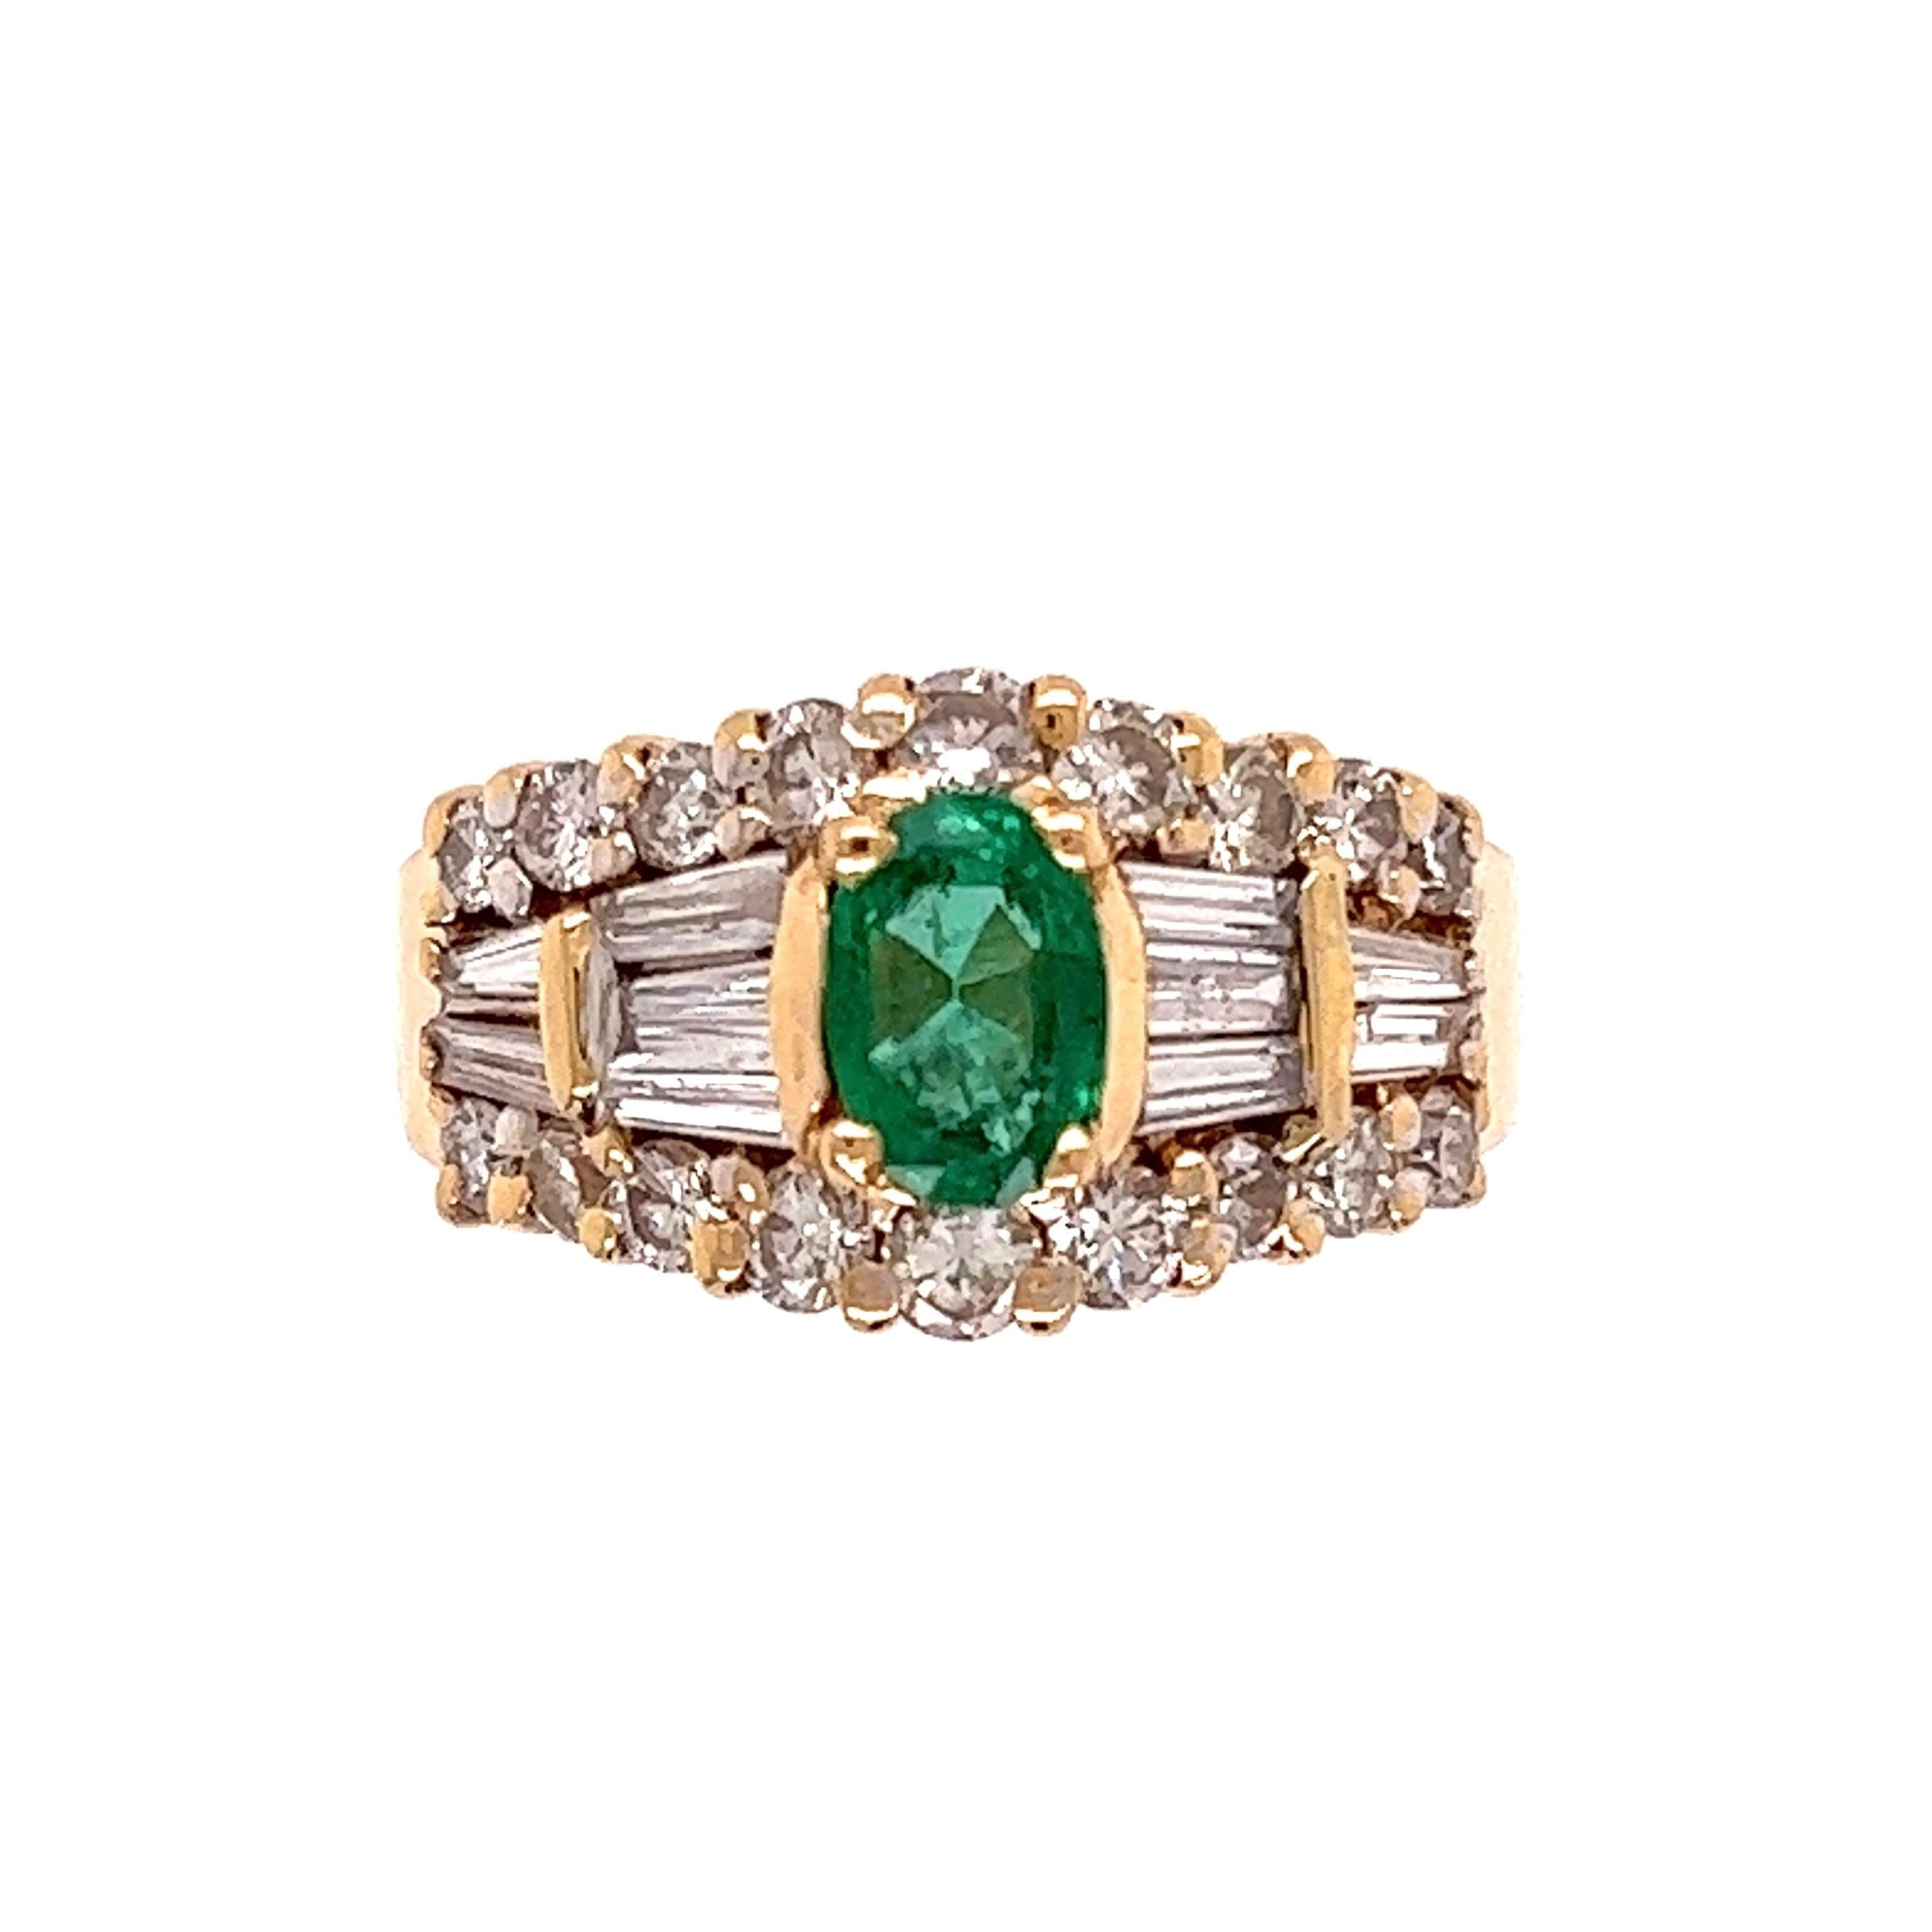 Mixed Cut Emerald and Diamond Cocktail Gold Band Ring Estate Fine Jewelry